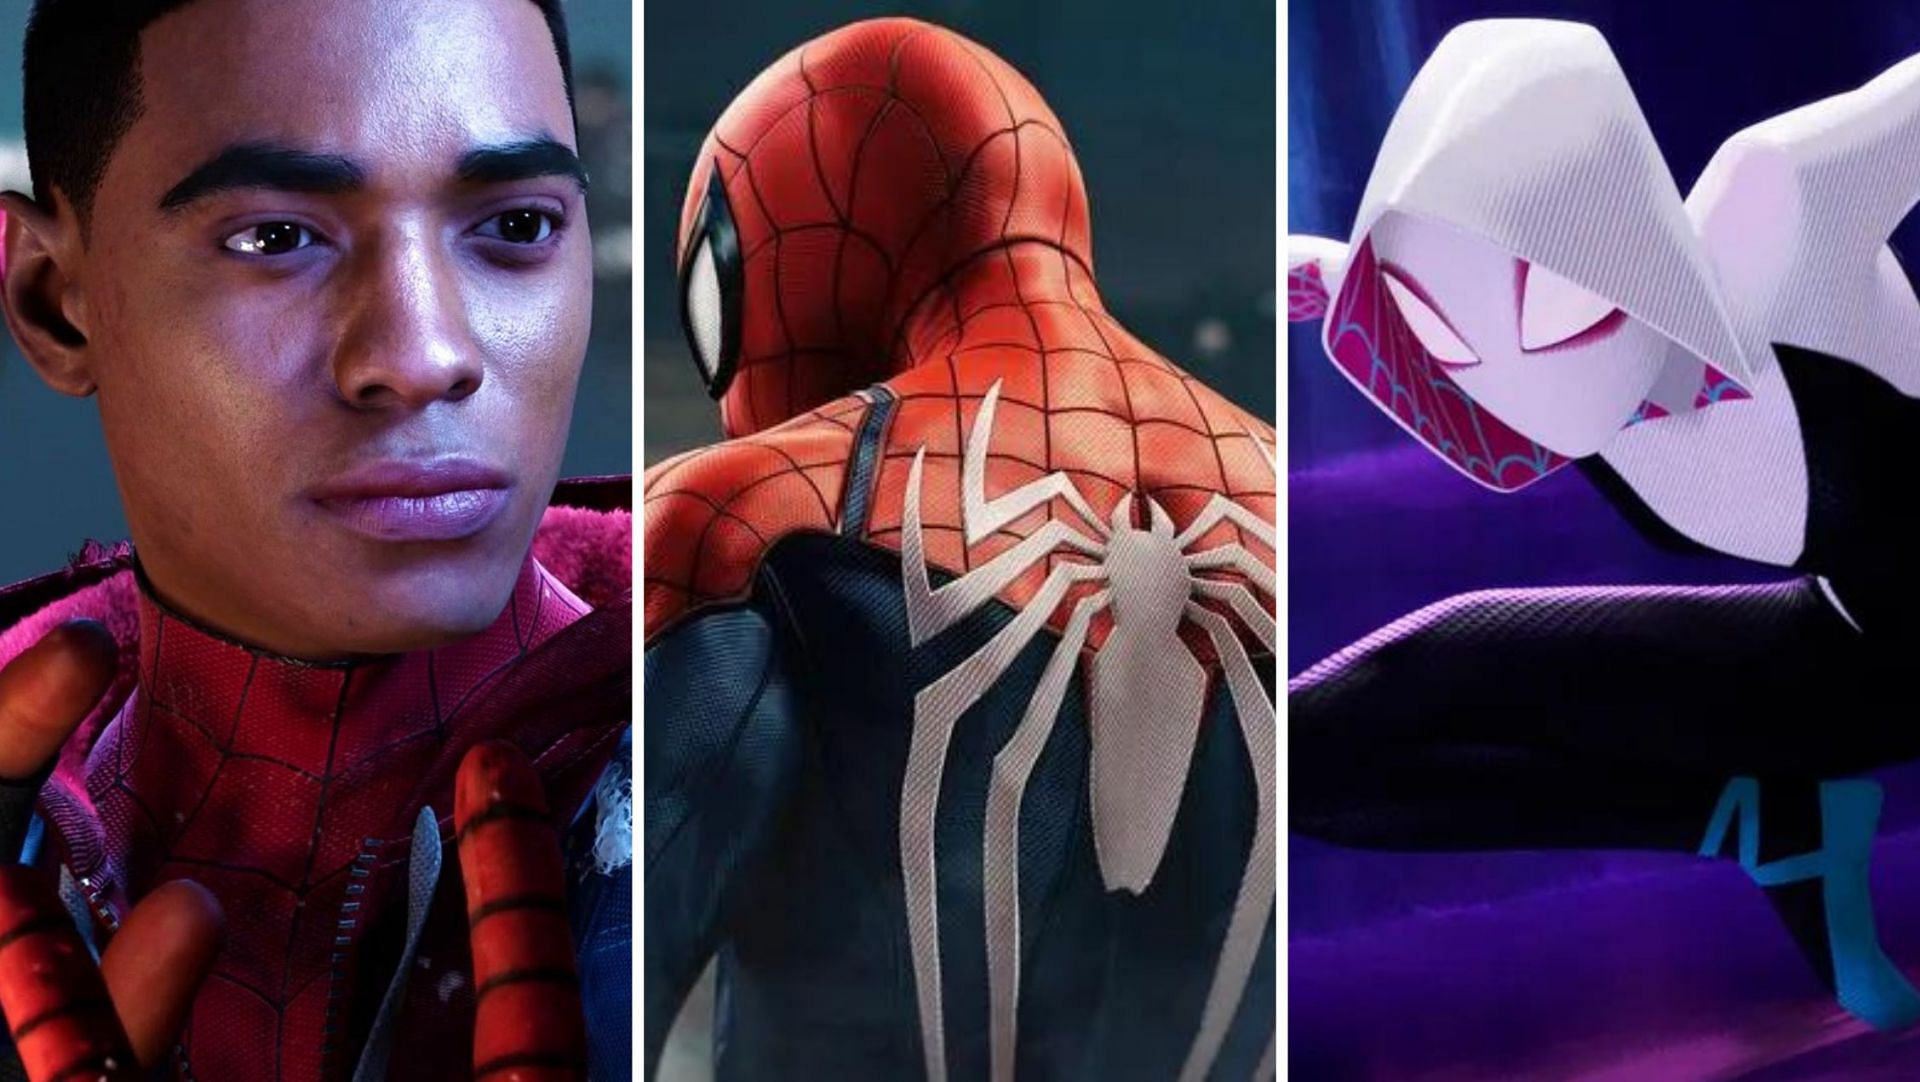 Spider-Man, Spider-Man, does whatever a spider can! Which of these powerful versions of the iconic superhero will come out on top? (Image via Sportskeeda)